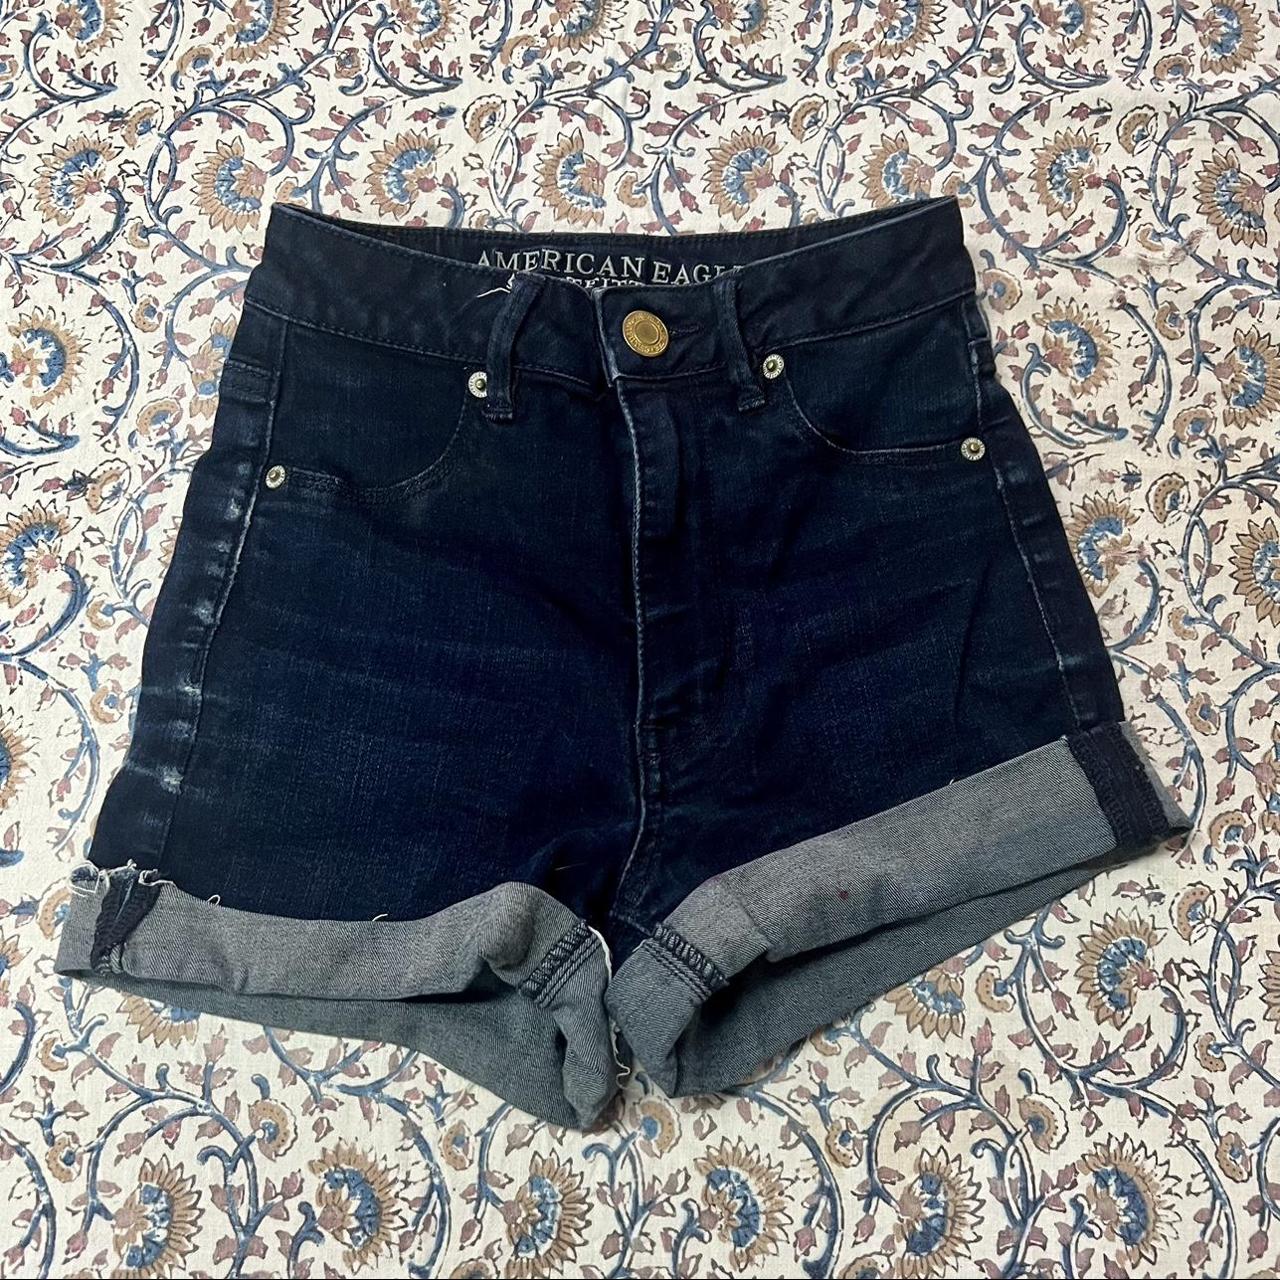 Short Shorts for Women, American Eagle Outfitters